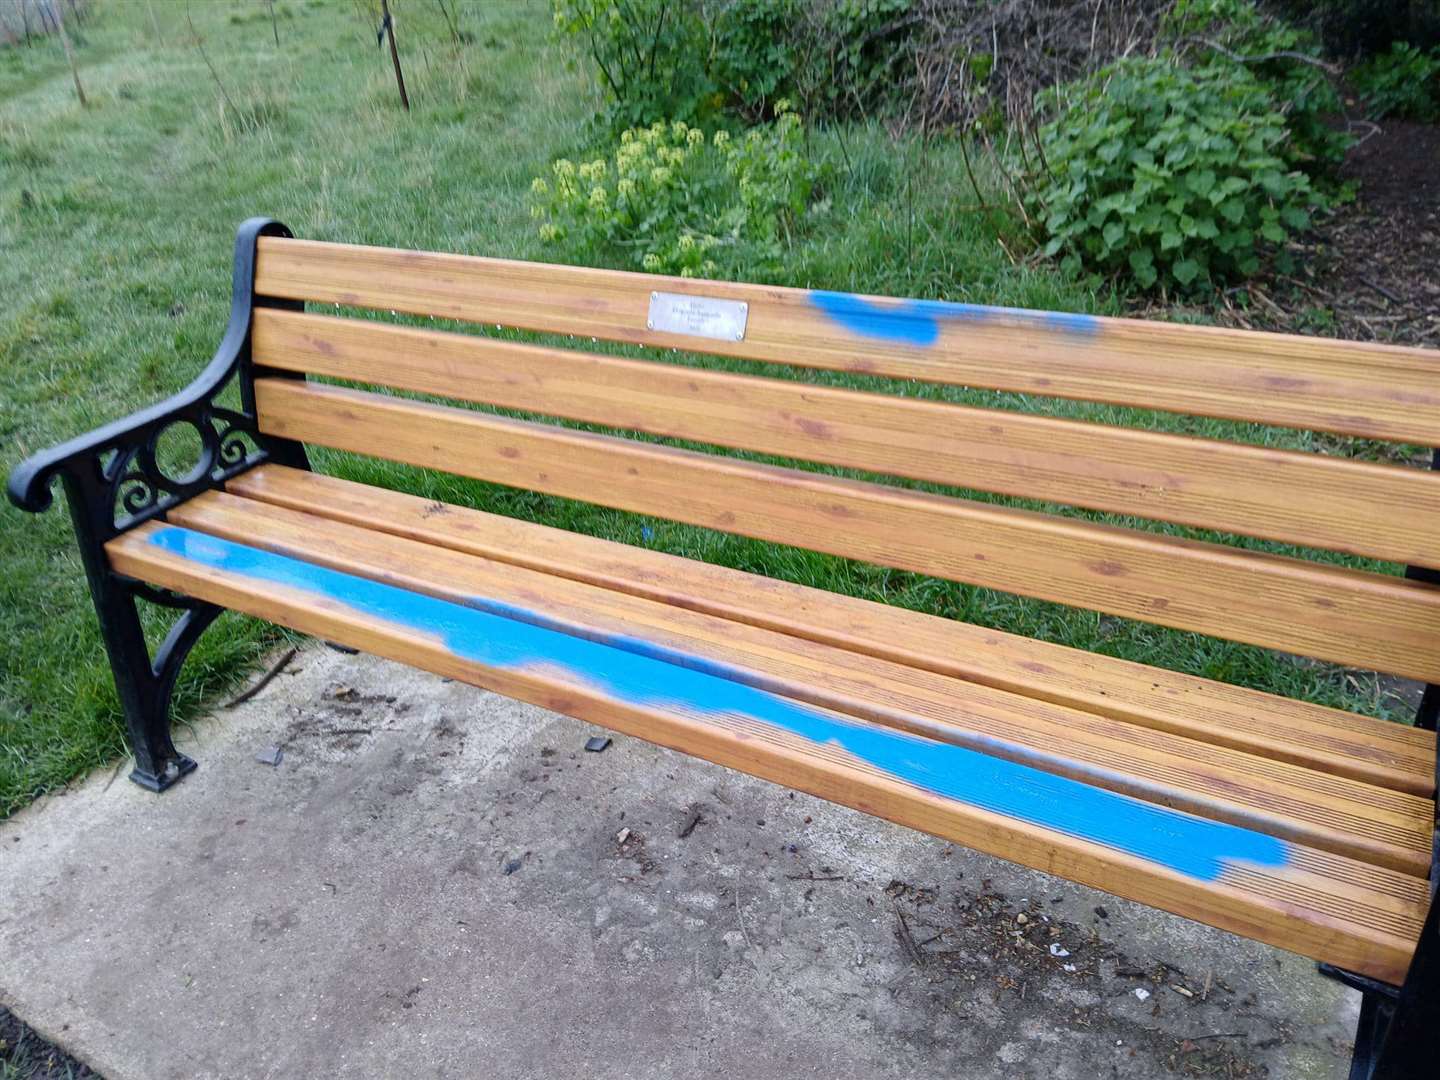 Hythe residents were shocked to discover the damage to the bench they had fundraised for